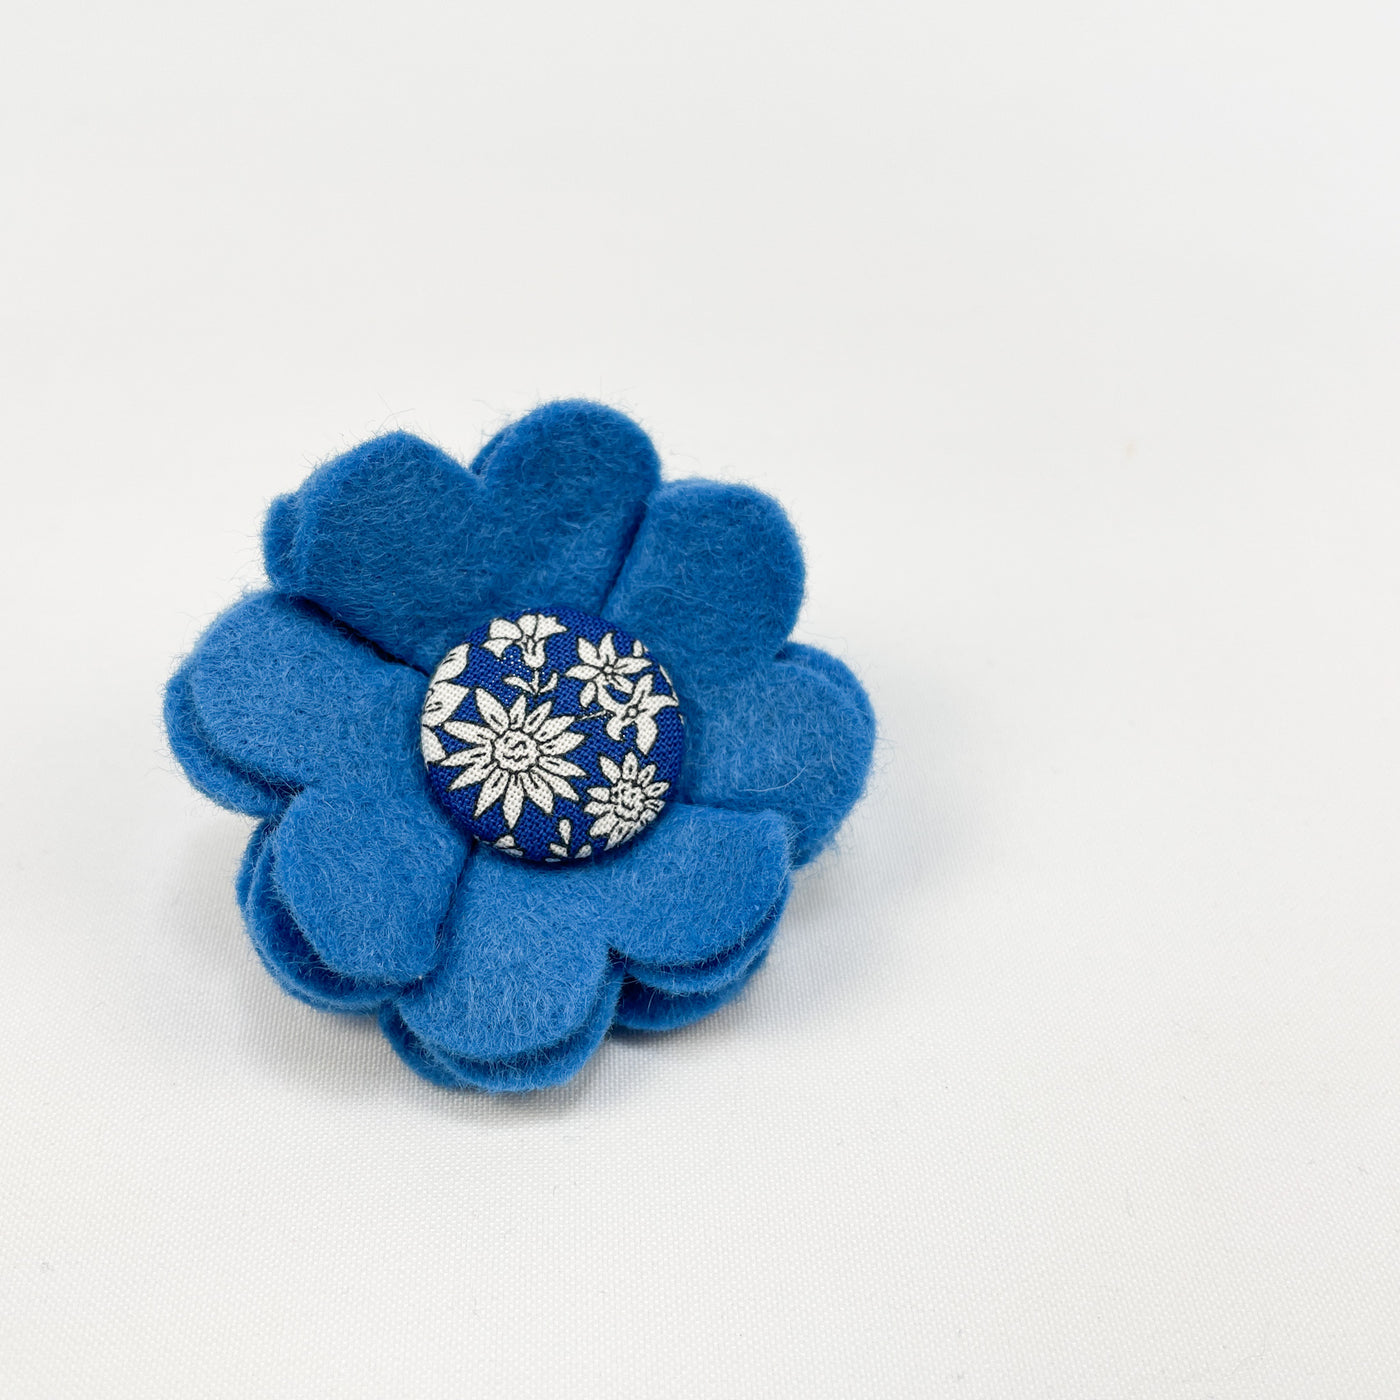 Cat Collar Flower Accessory in blue with Liberty Fabric Button